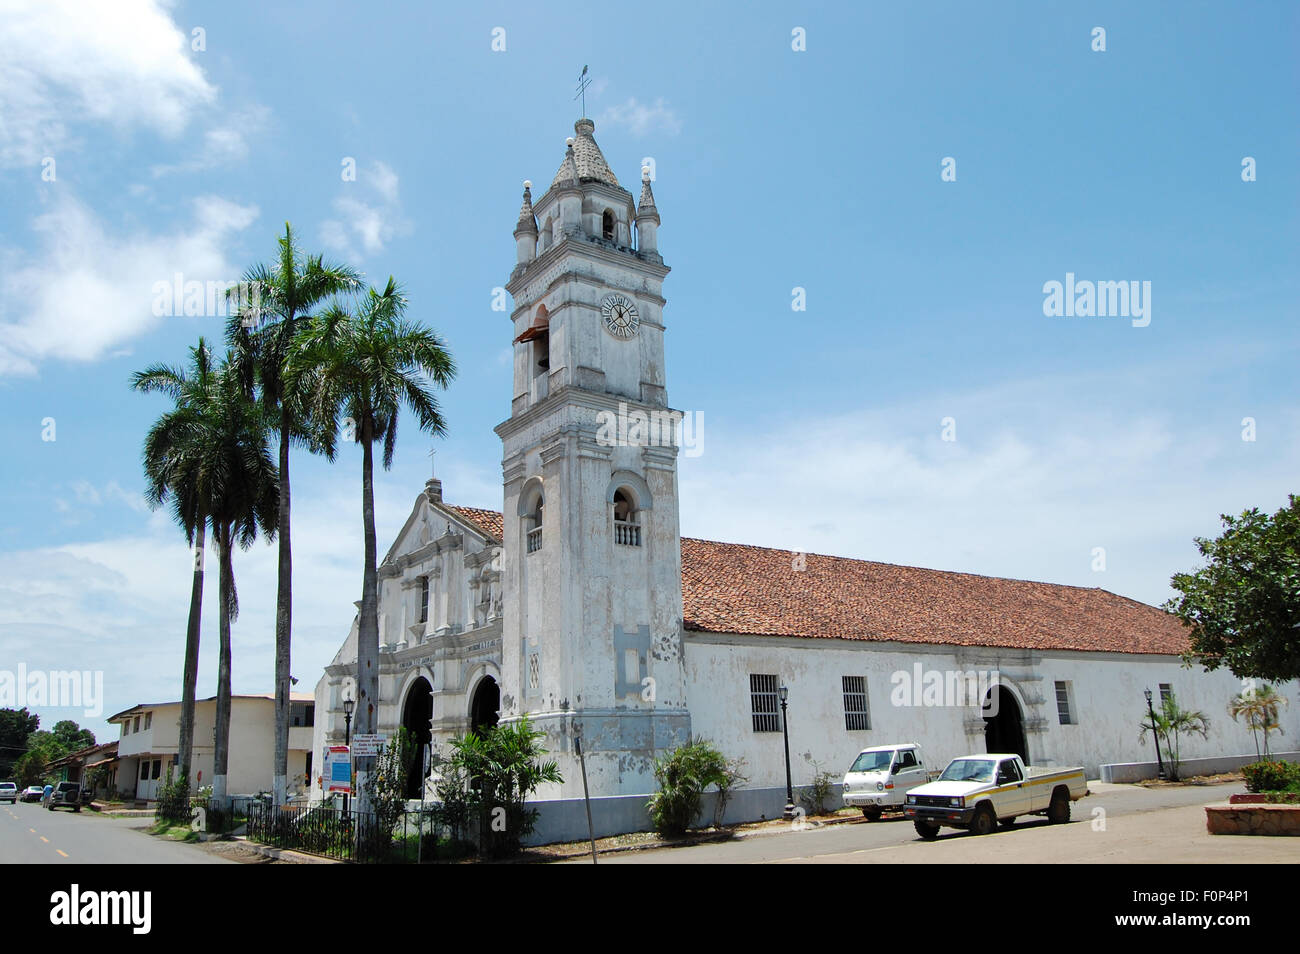 Old church in the heart of Panama dating from the 1700. Stock Photo